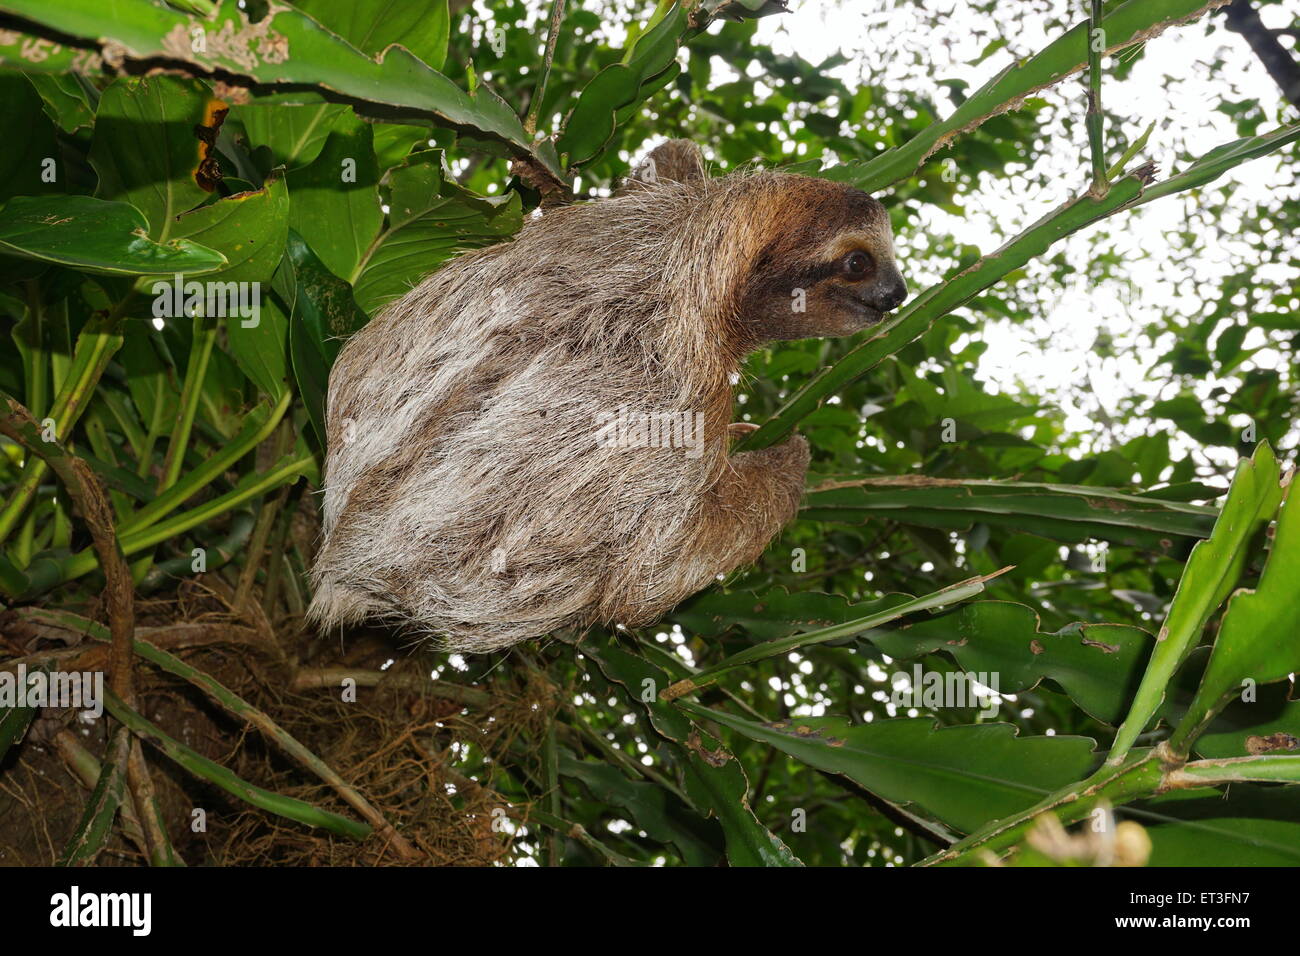 Three-toed sloth animal climbing plant in the jungle of Costa Rica, Central America Stock Photo